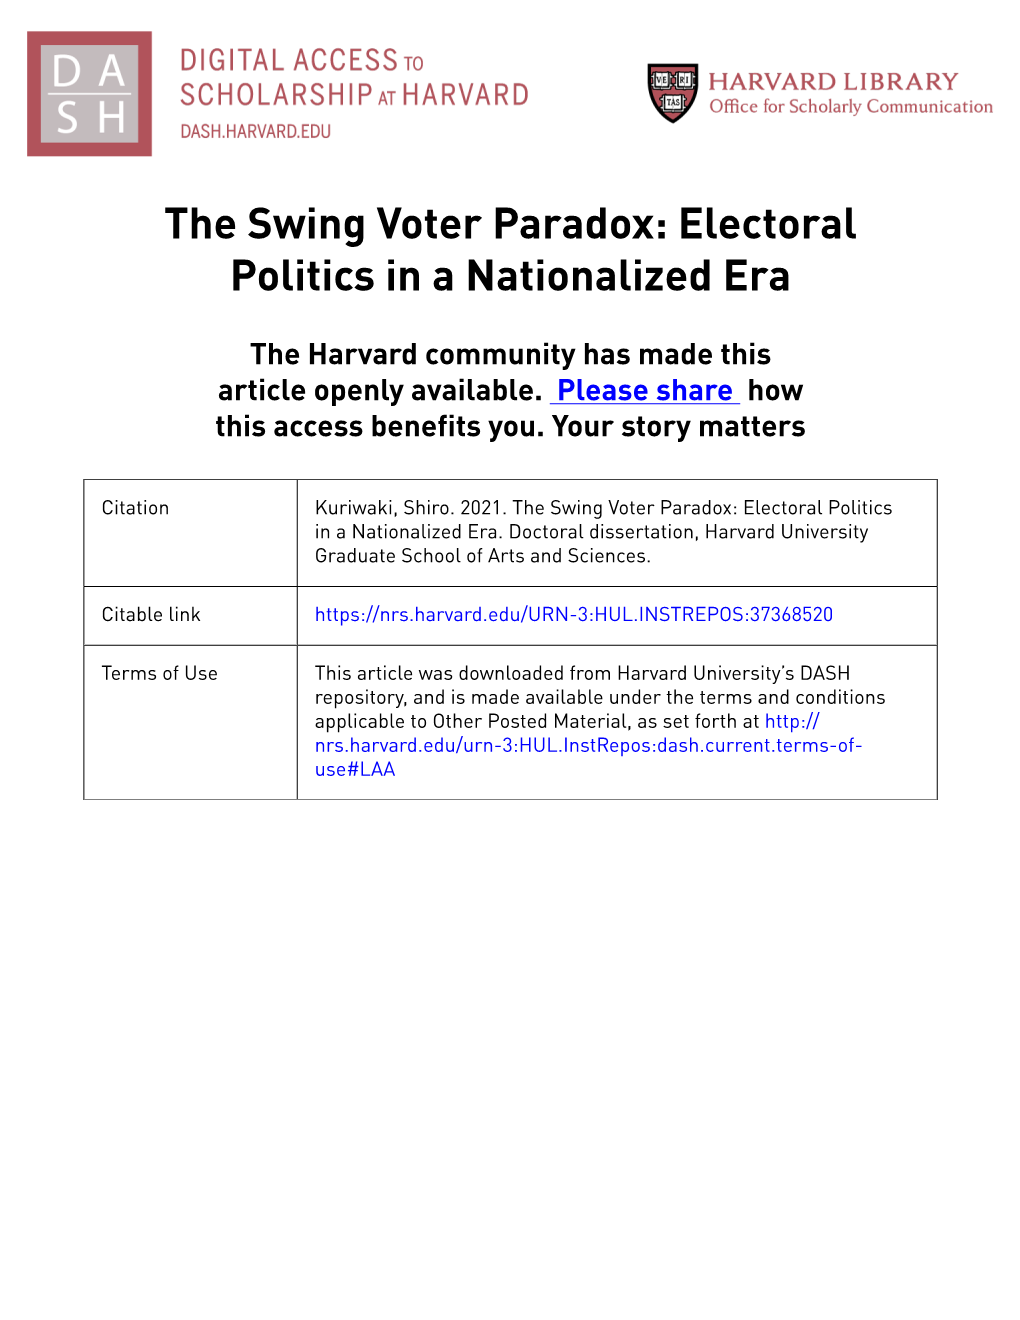 The Swing Voter Paradox: Electoral Politics in a Nationalized Era